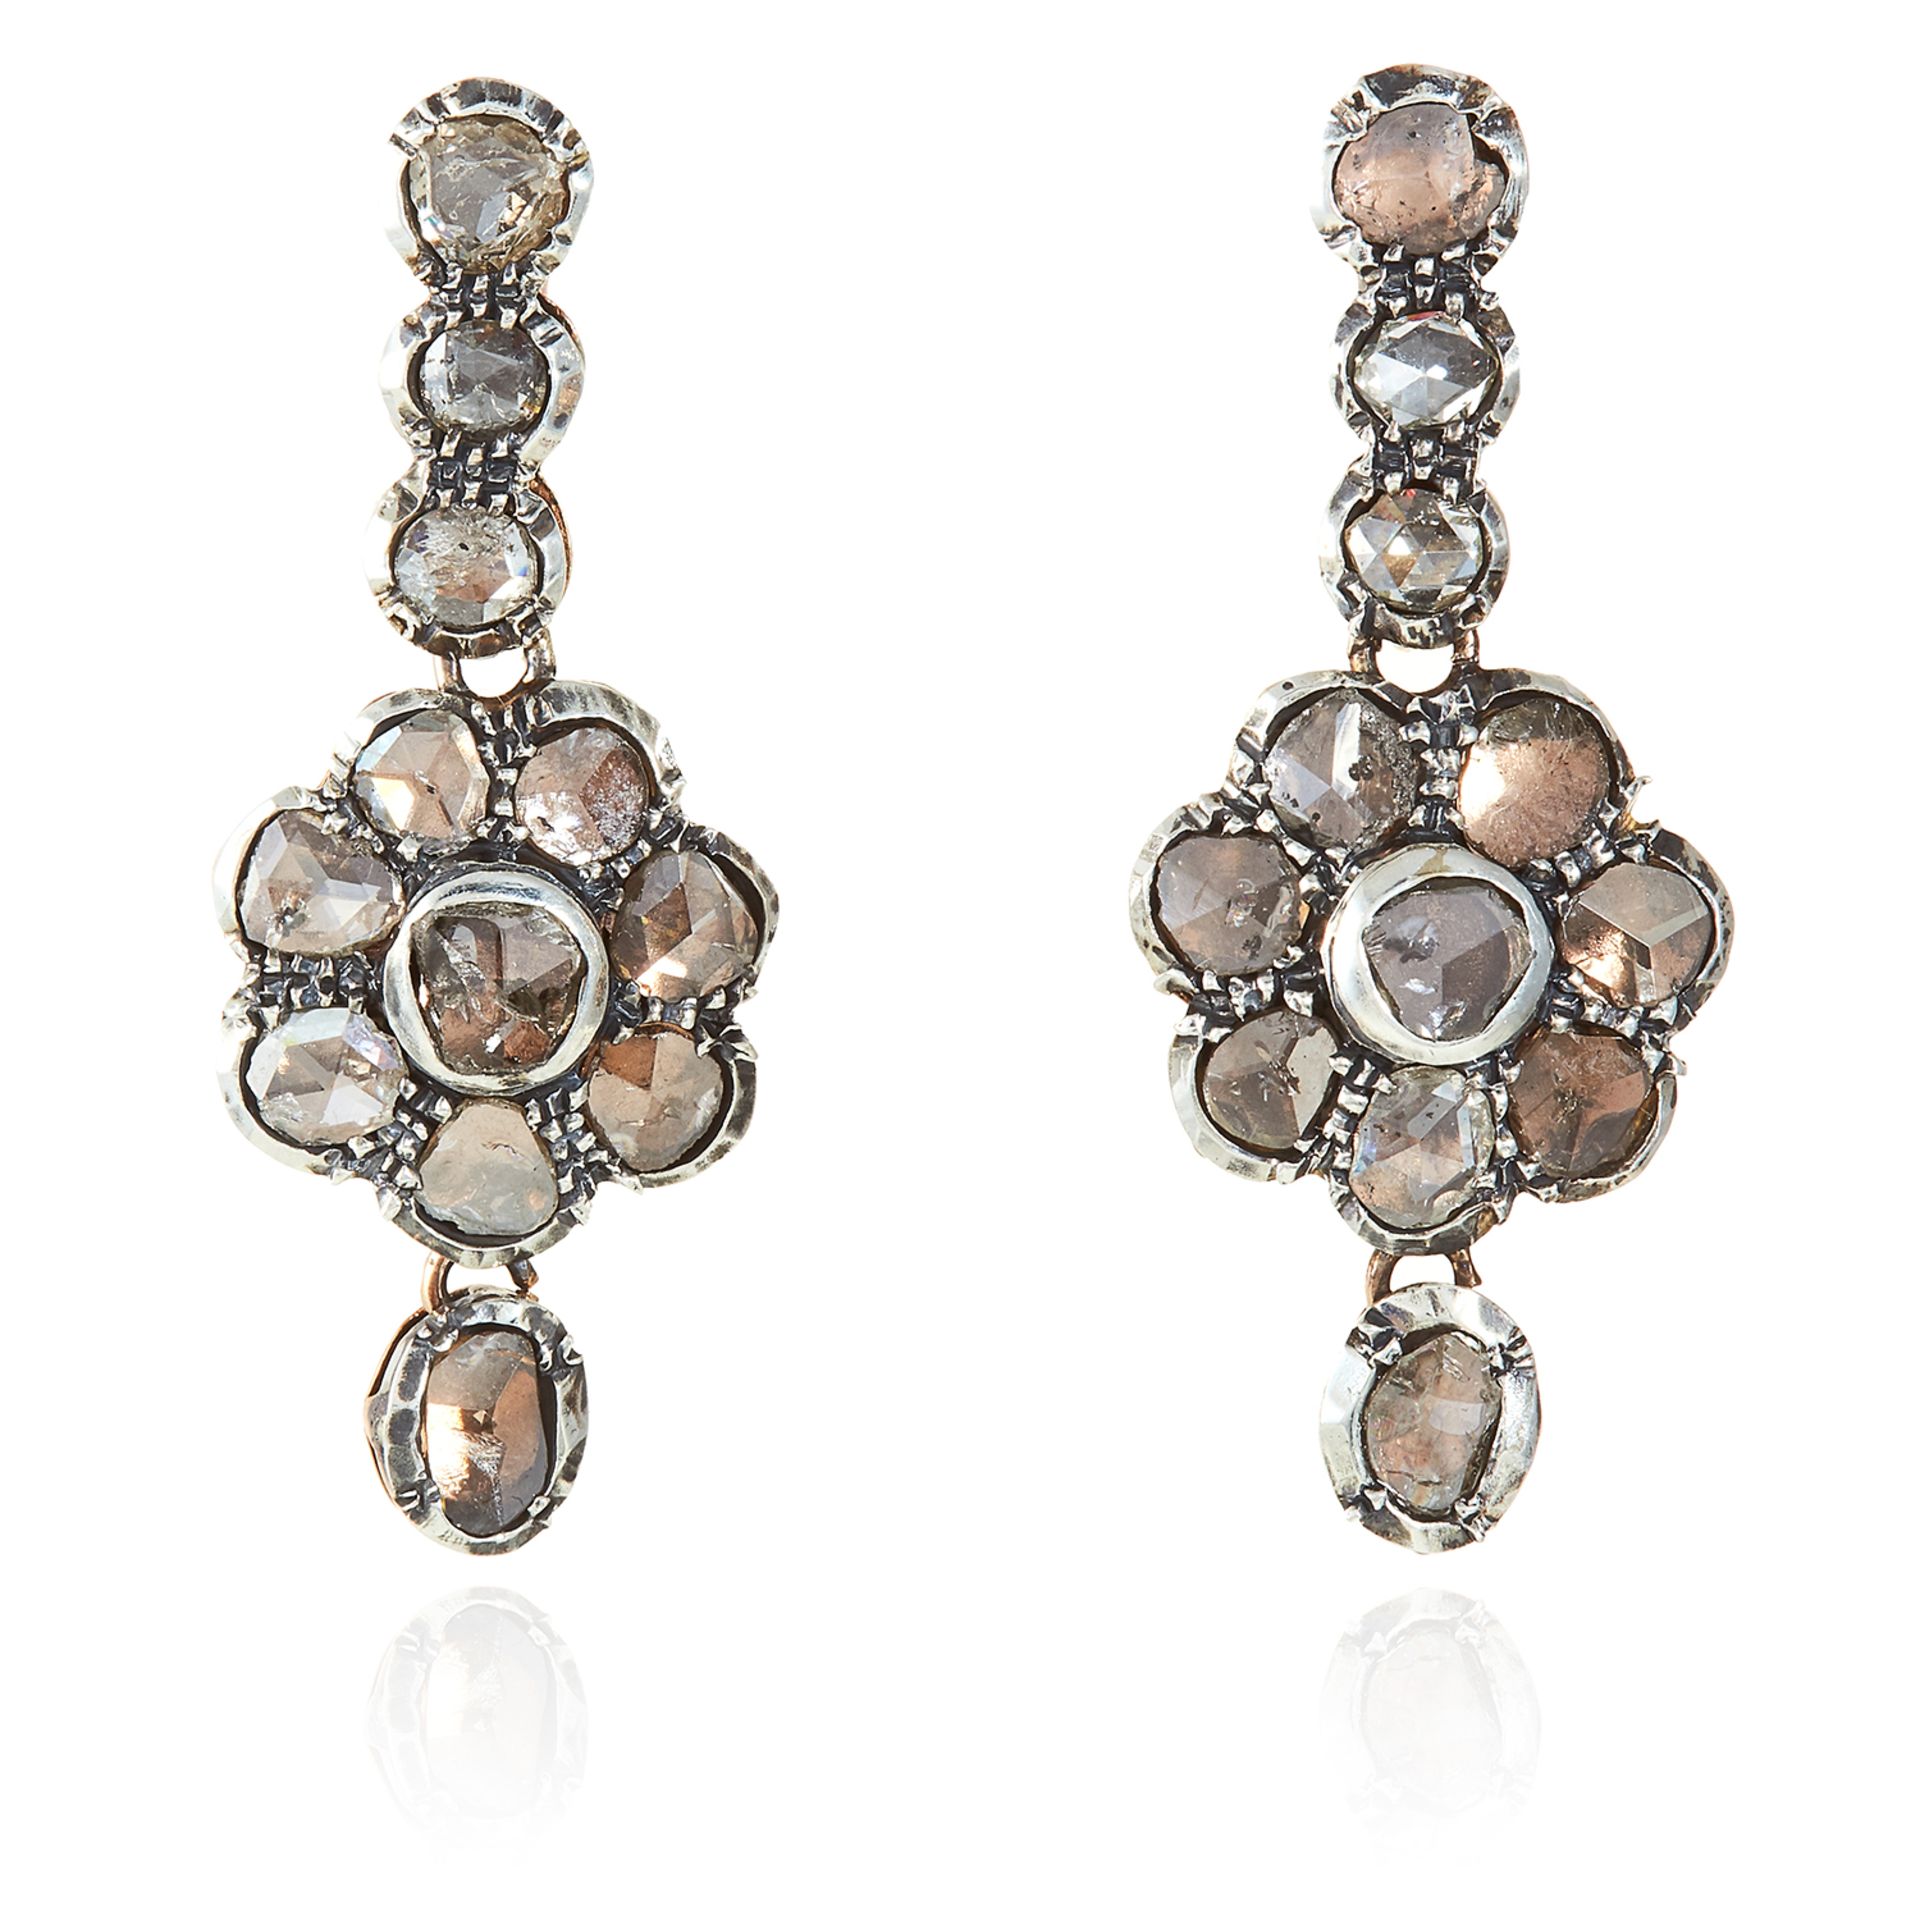 A PAIR OF ANTIQUE DIAMOND EARRINGS in yellow gold and silver, the articulated bodies jewelled with